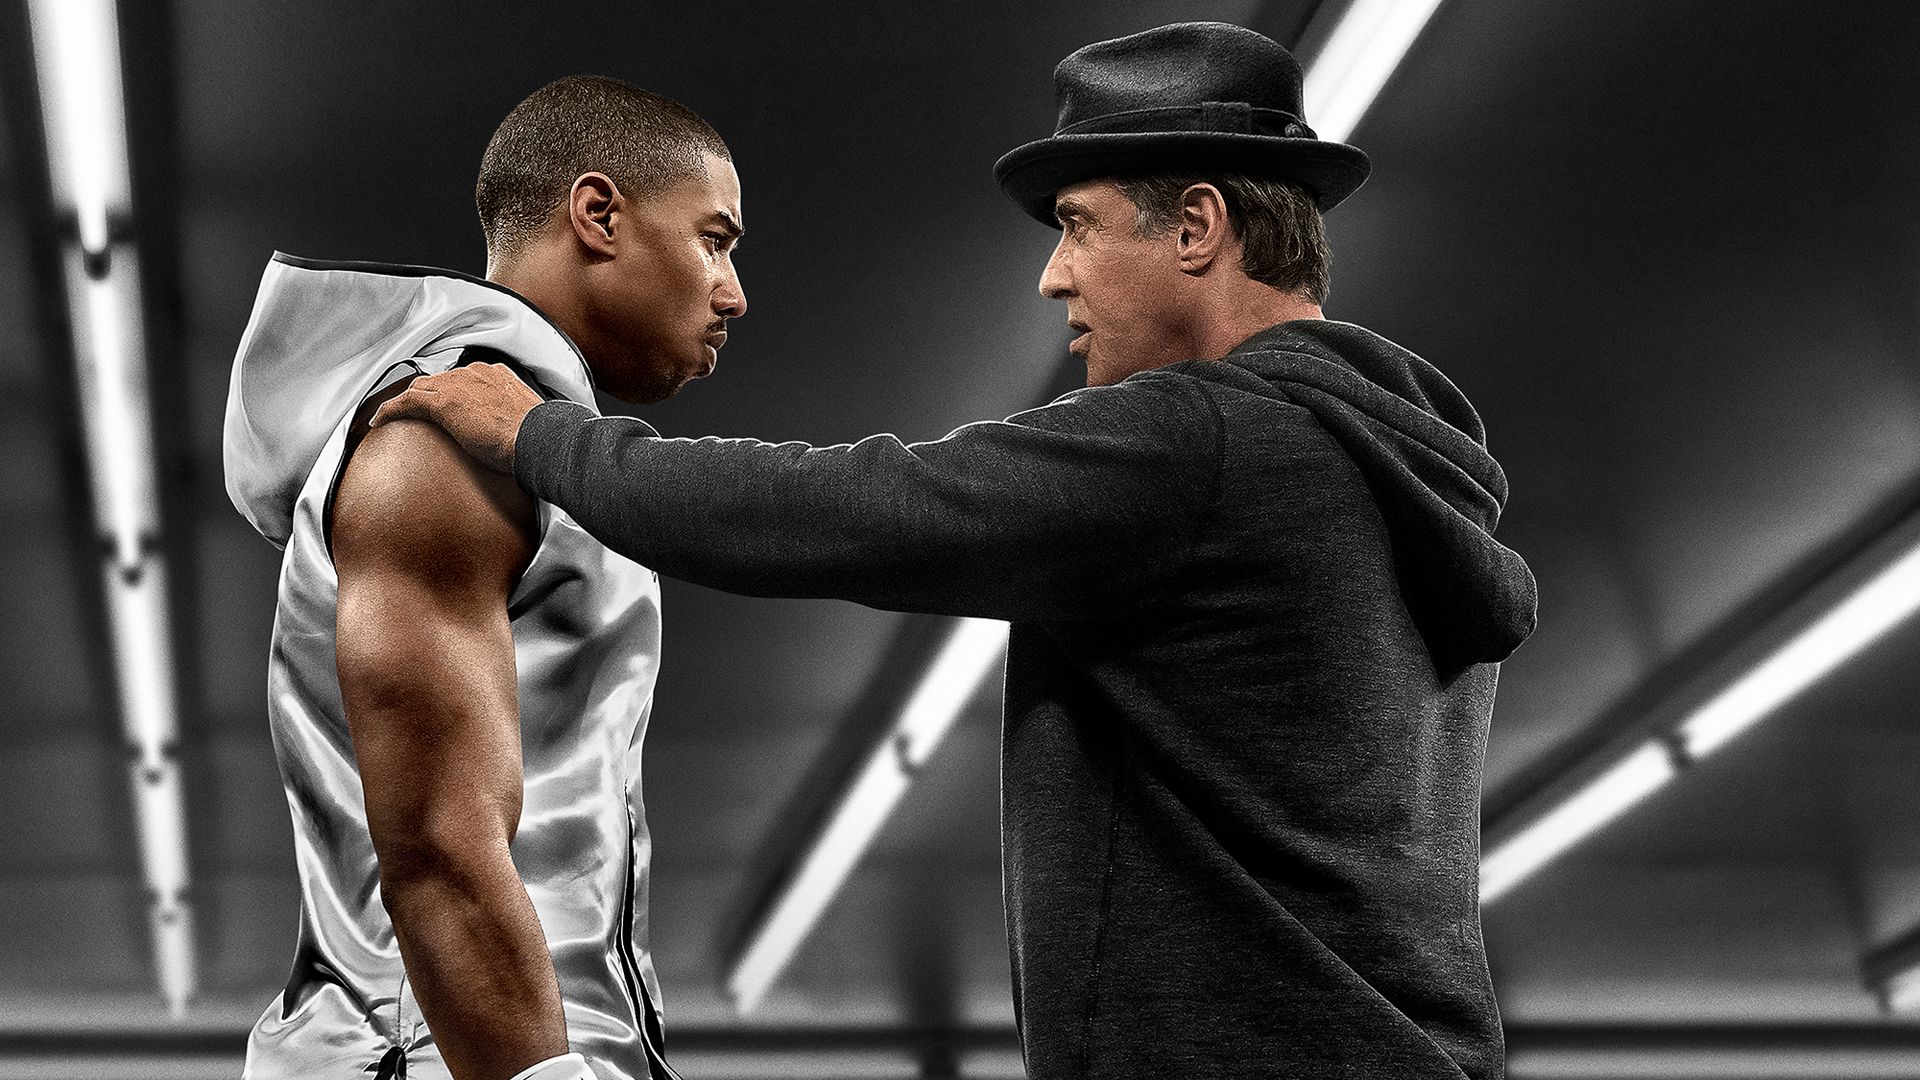 Creed - Rocky's Legacy